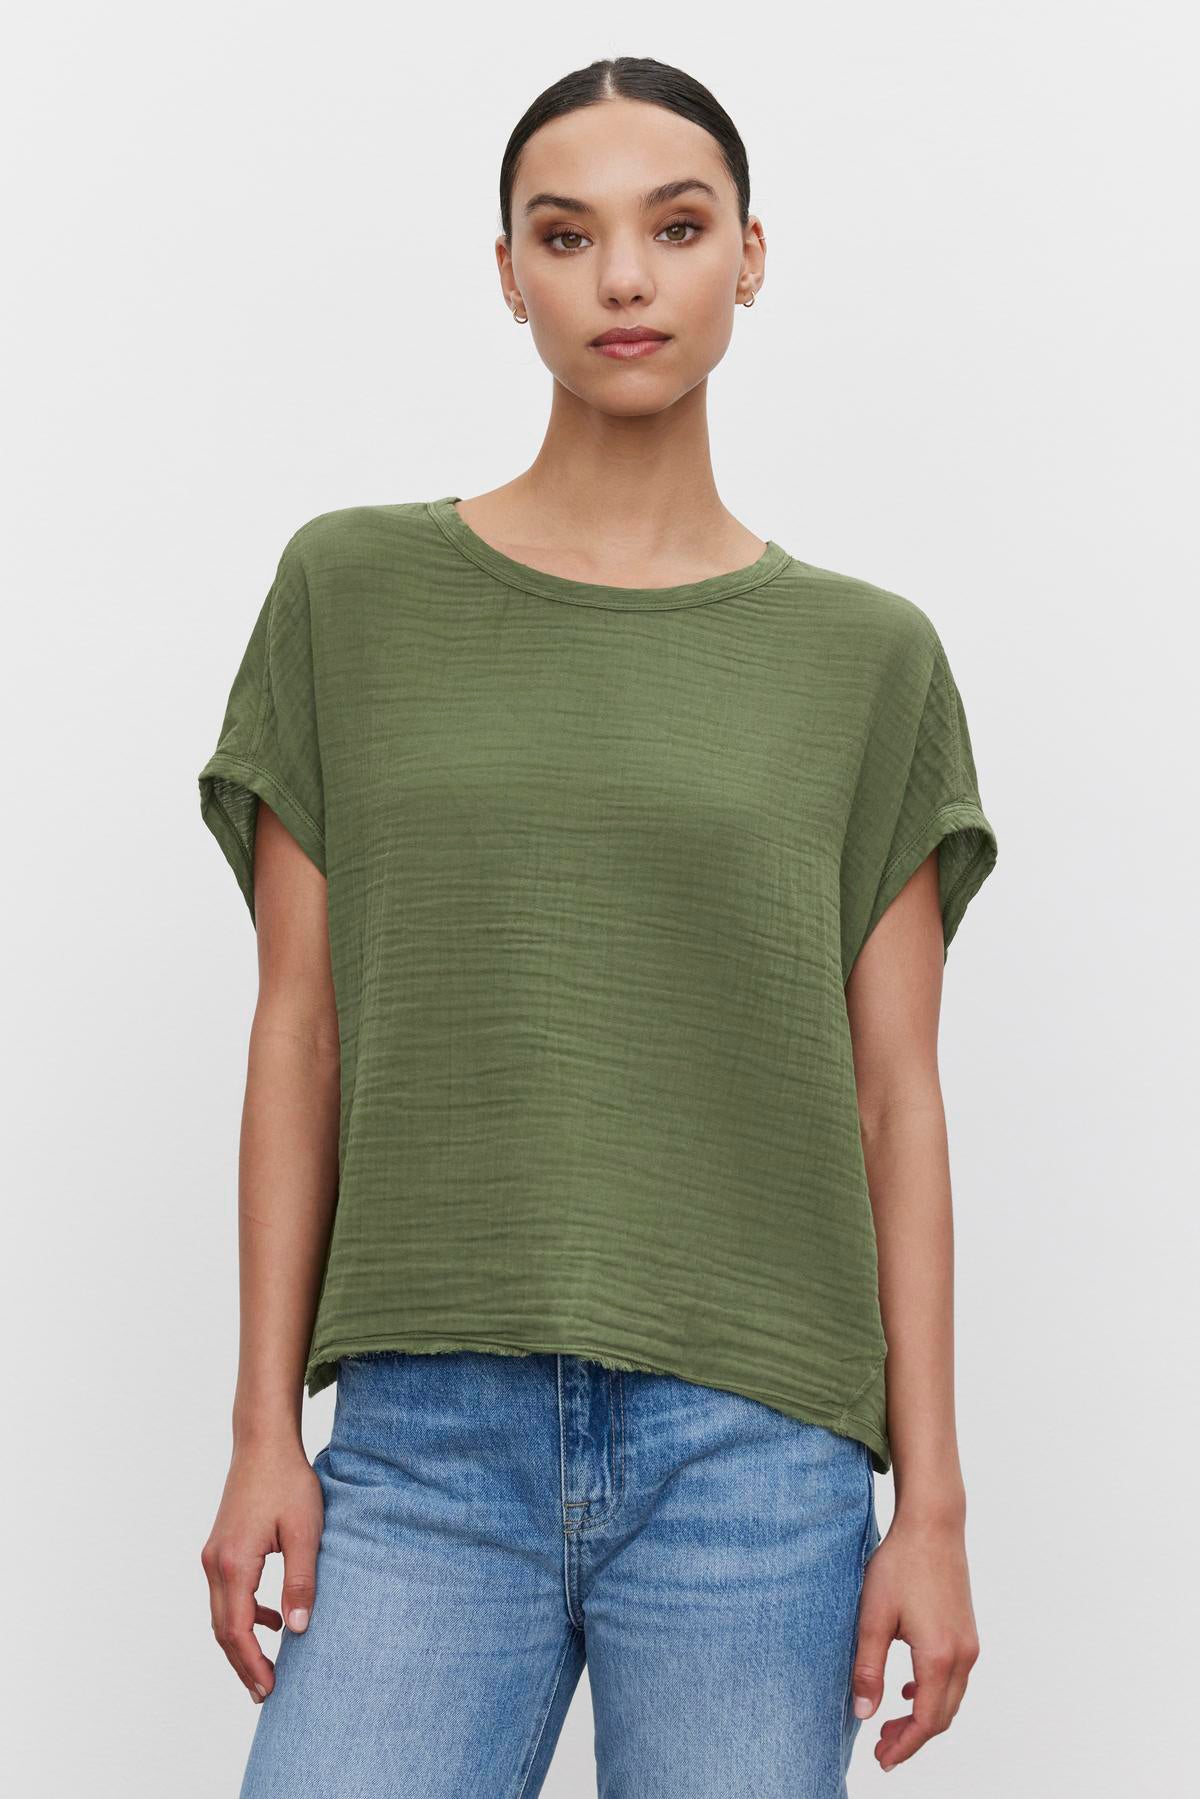   Young woman in a green CAROLINE COCOON TOP and blue jeans standing against a white background. Brand: Velvet by Graham & Spencer 